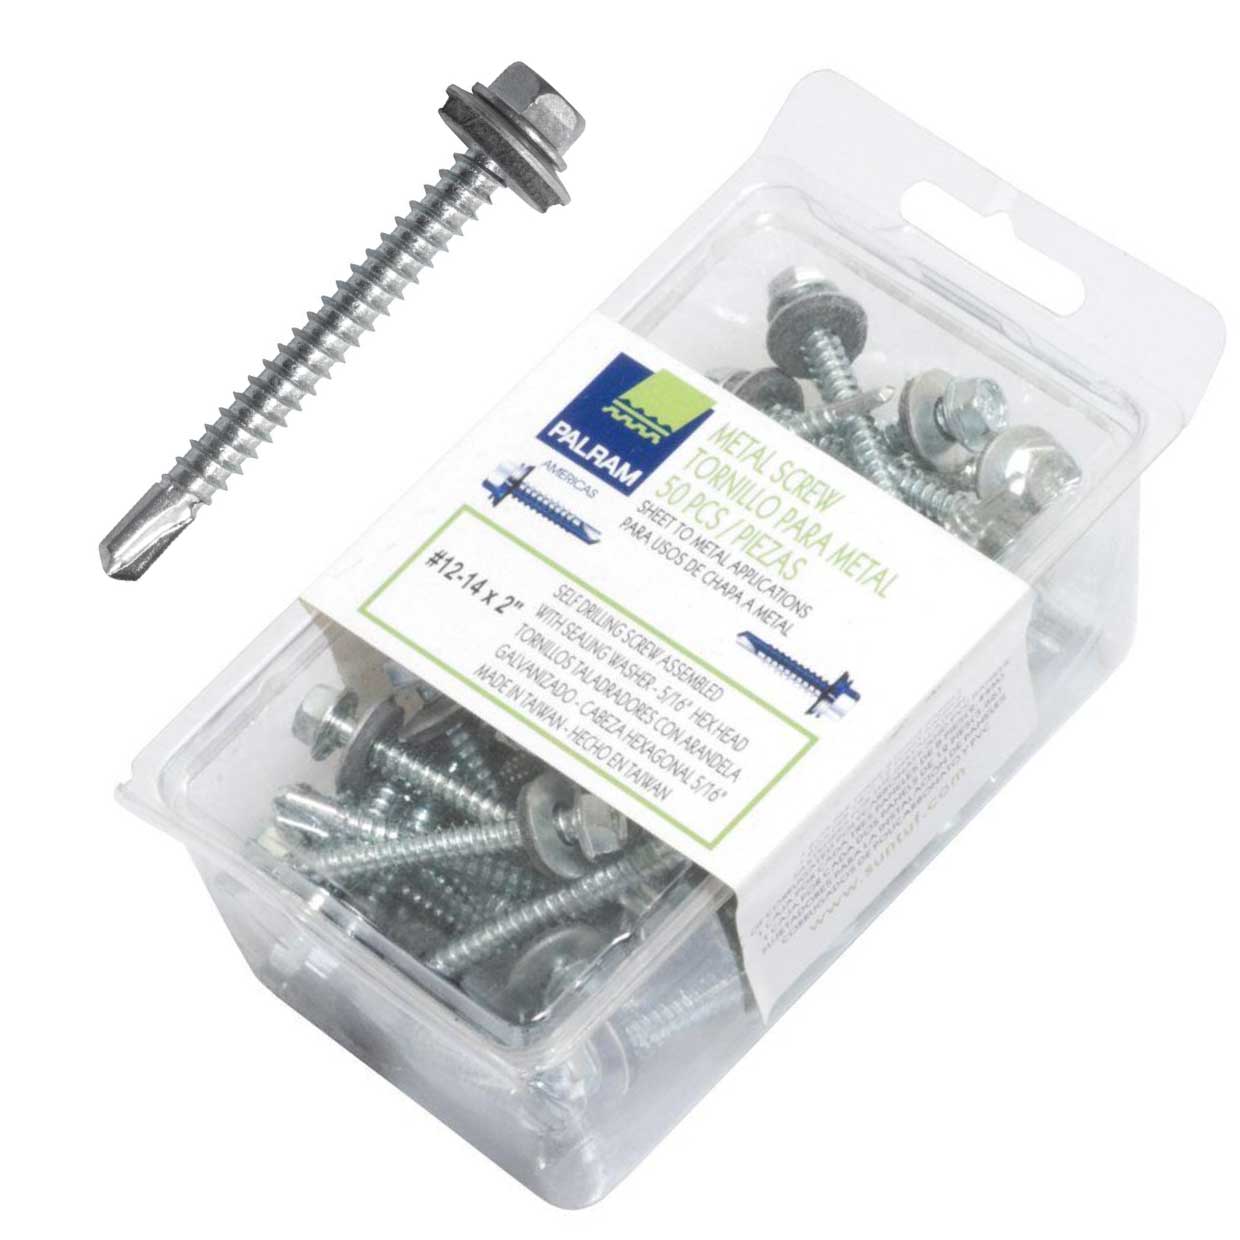 4.5 x 50mm CORRUGATED ROOFING SCREWS WITH HINGED PLASTIC CAPS PACK OF 1000 * 